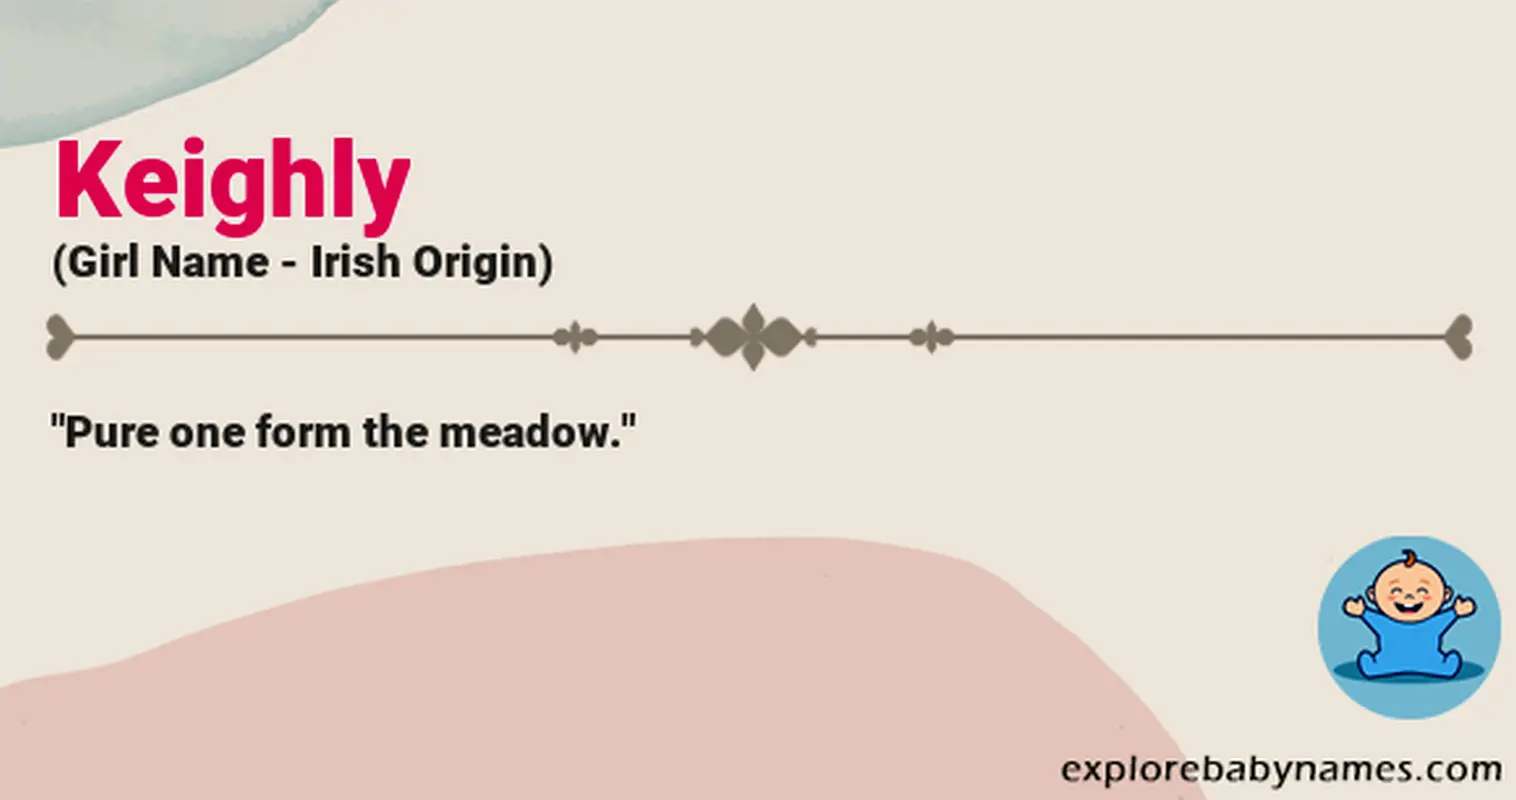 Meaning of Keighly